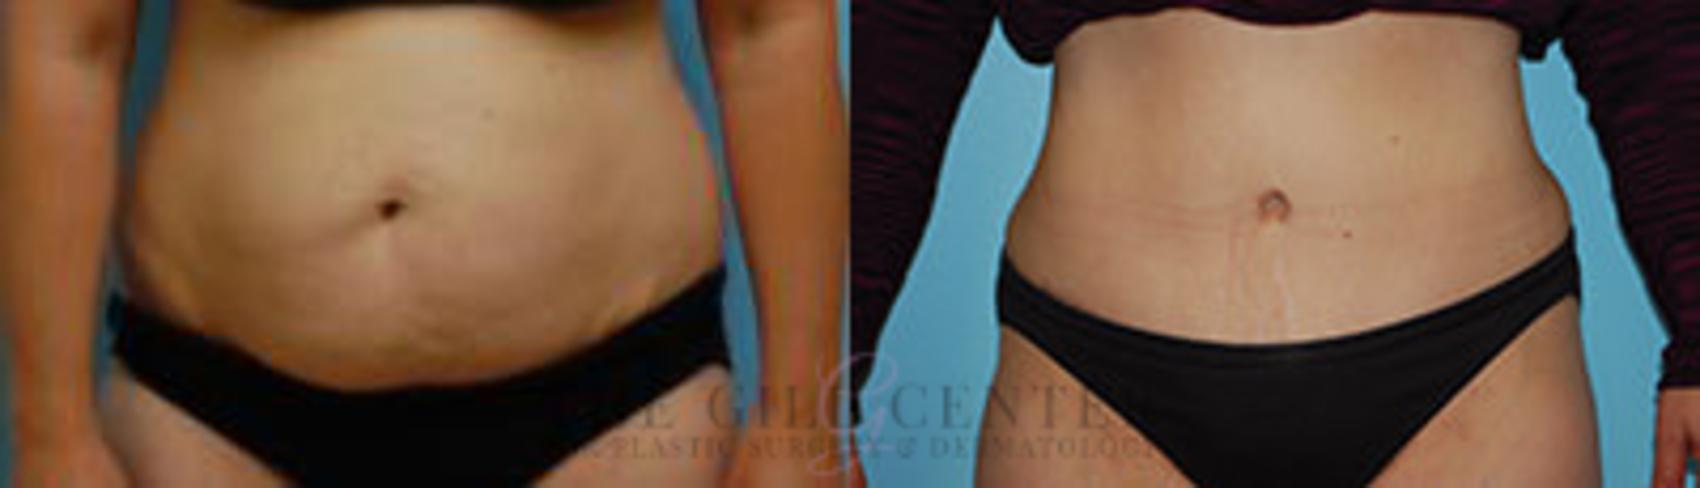 Tummy Tuck Case 259 Before & After Front | The Woodlands, TX | The Gill Center for Plastic Surgery and Dermatology